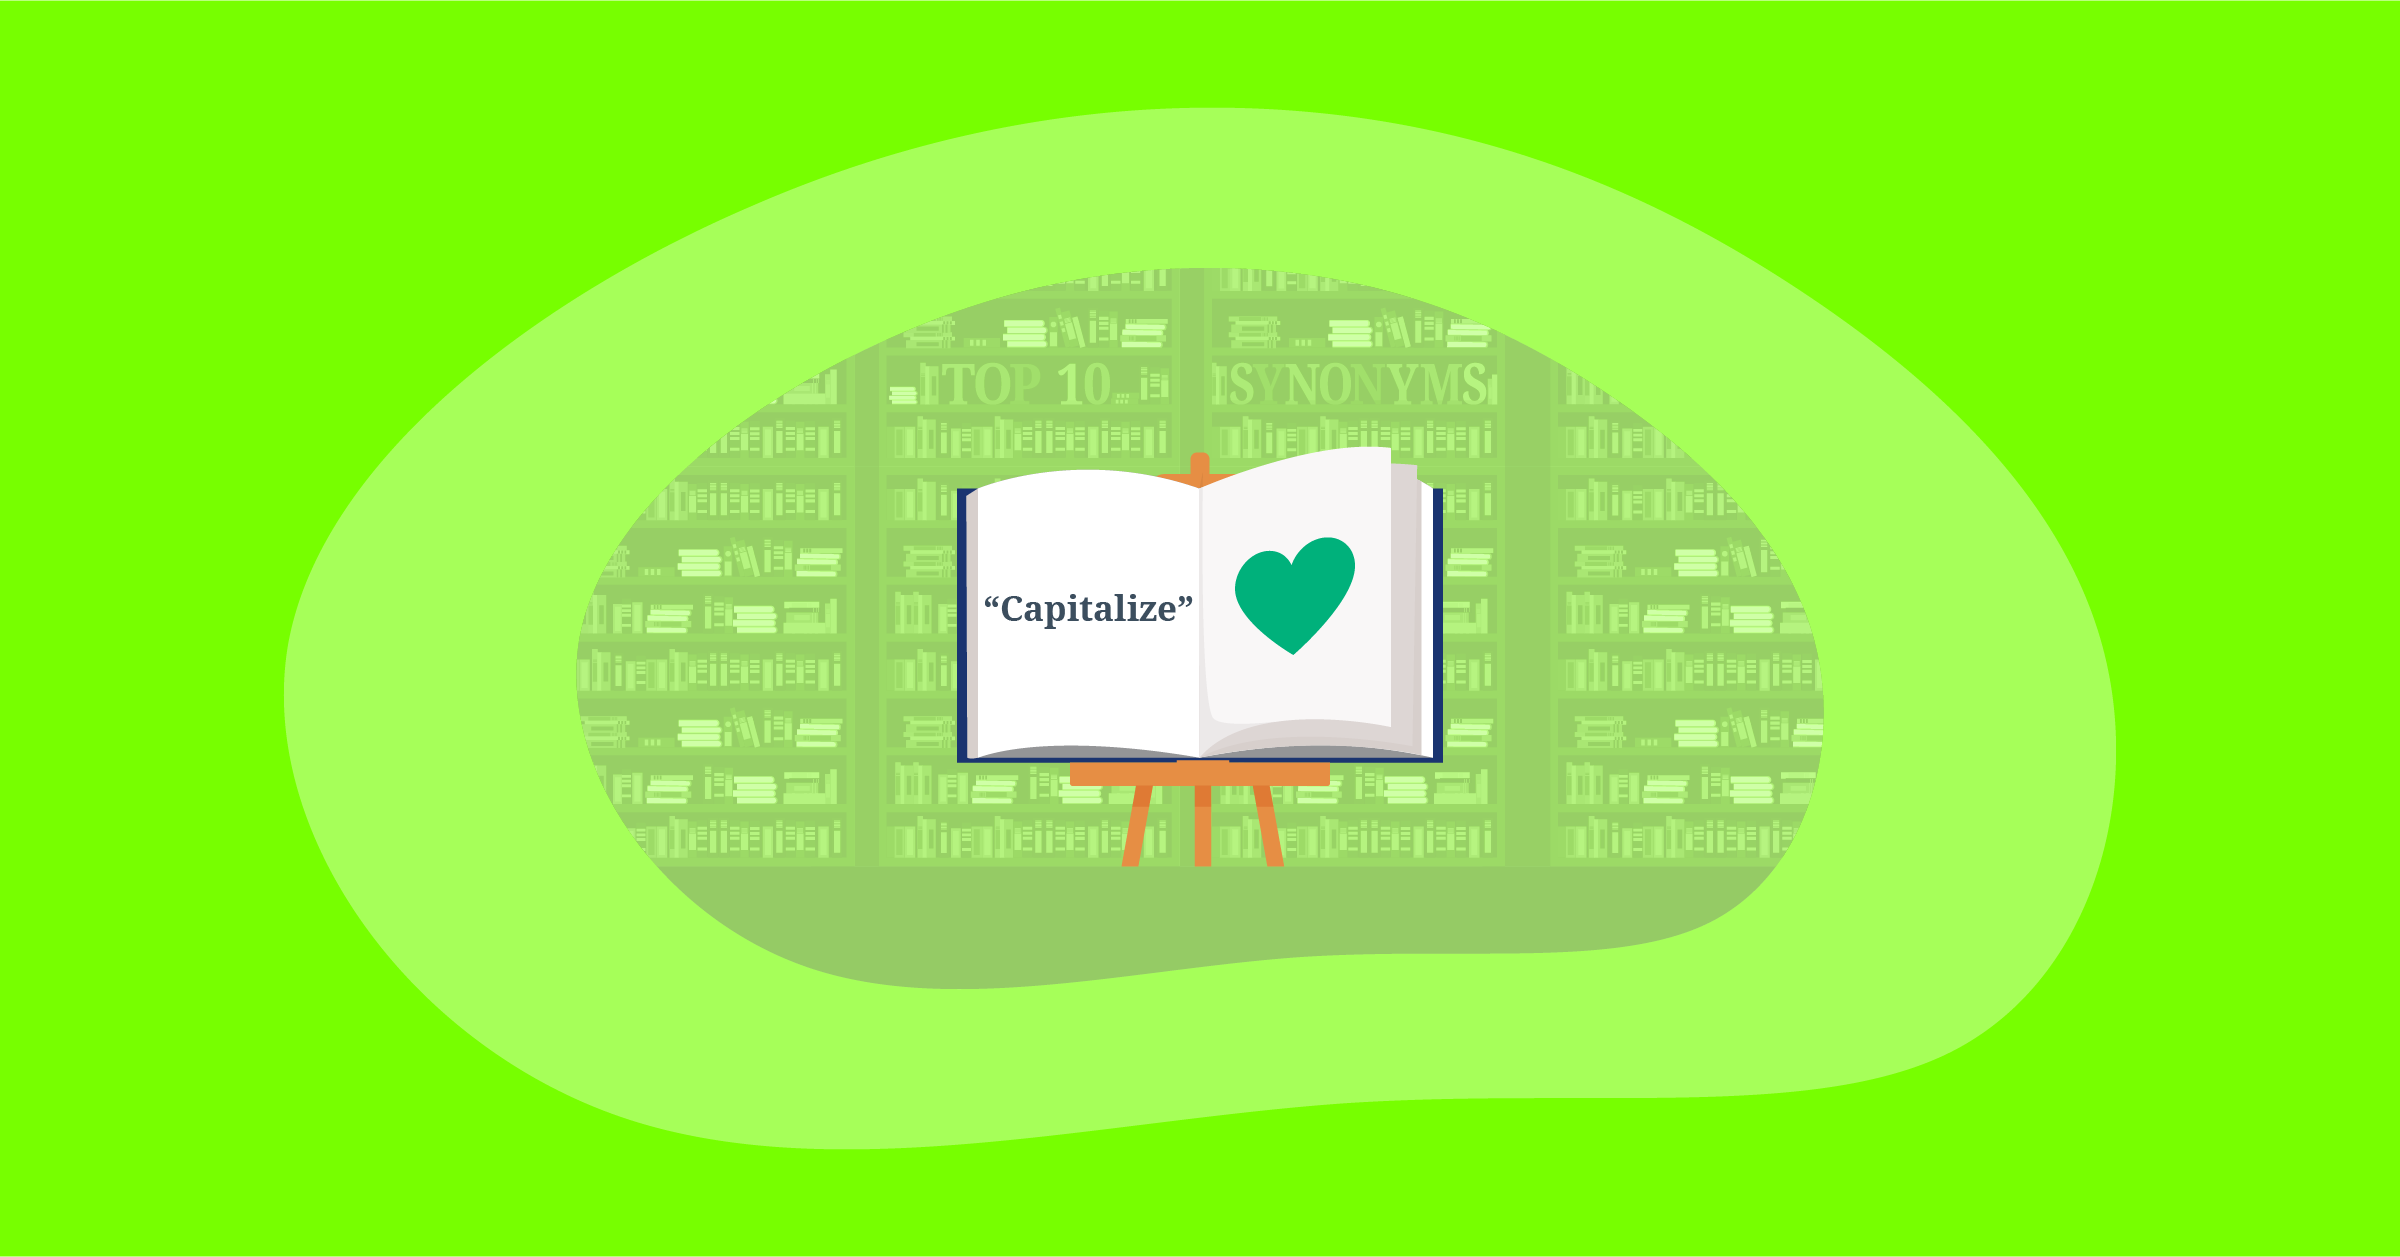 Illustration for Top 10 Positive & Impactful Synonyms for “Capitalize”